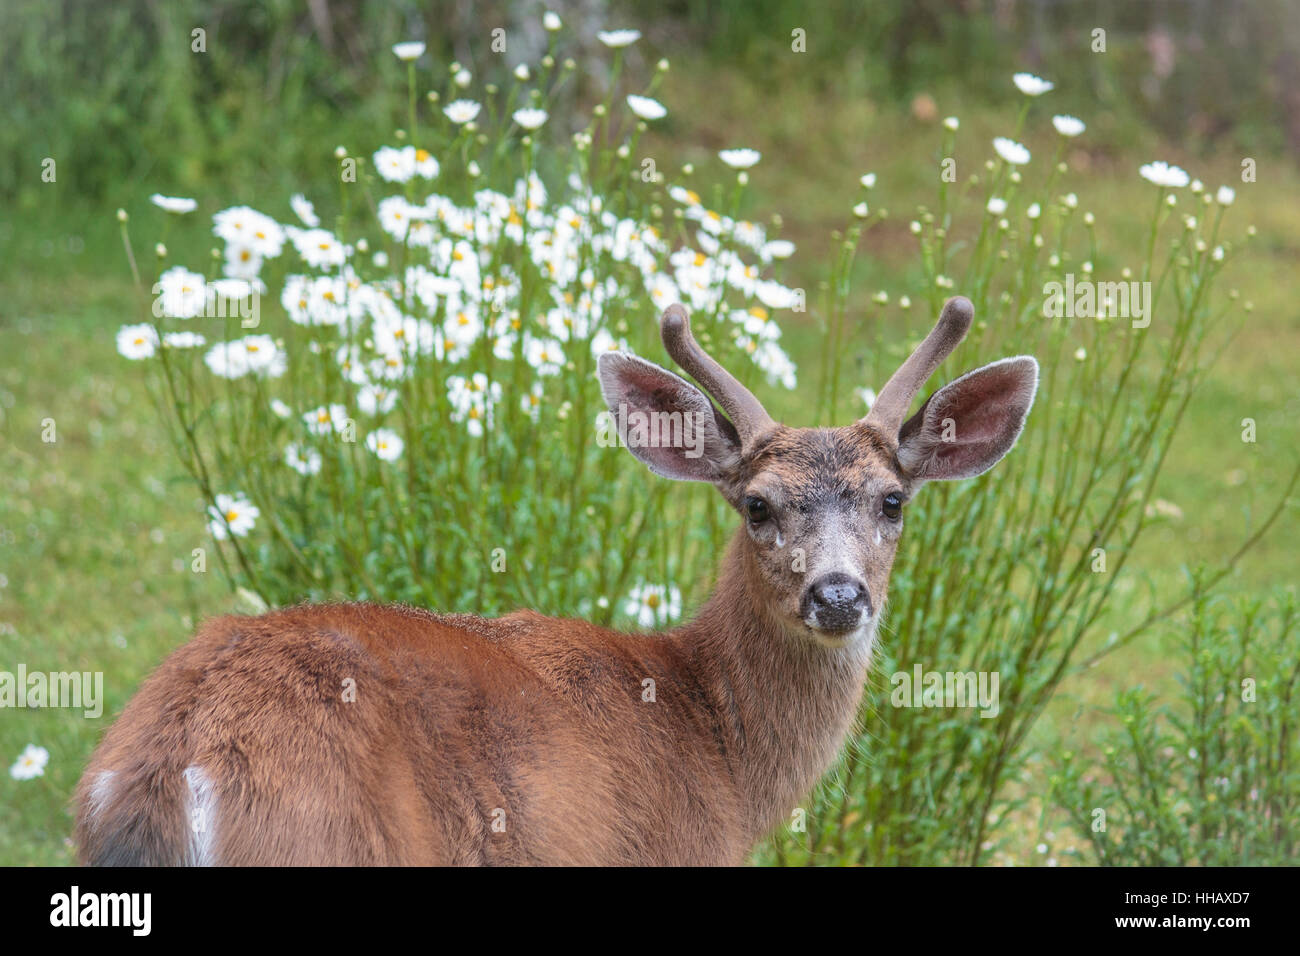 A young male deer with velvety antlers stares at the camera, with tall white wild daisies behind him. Stock Photo